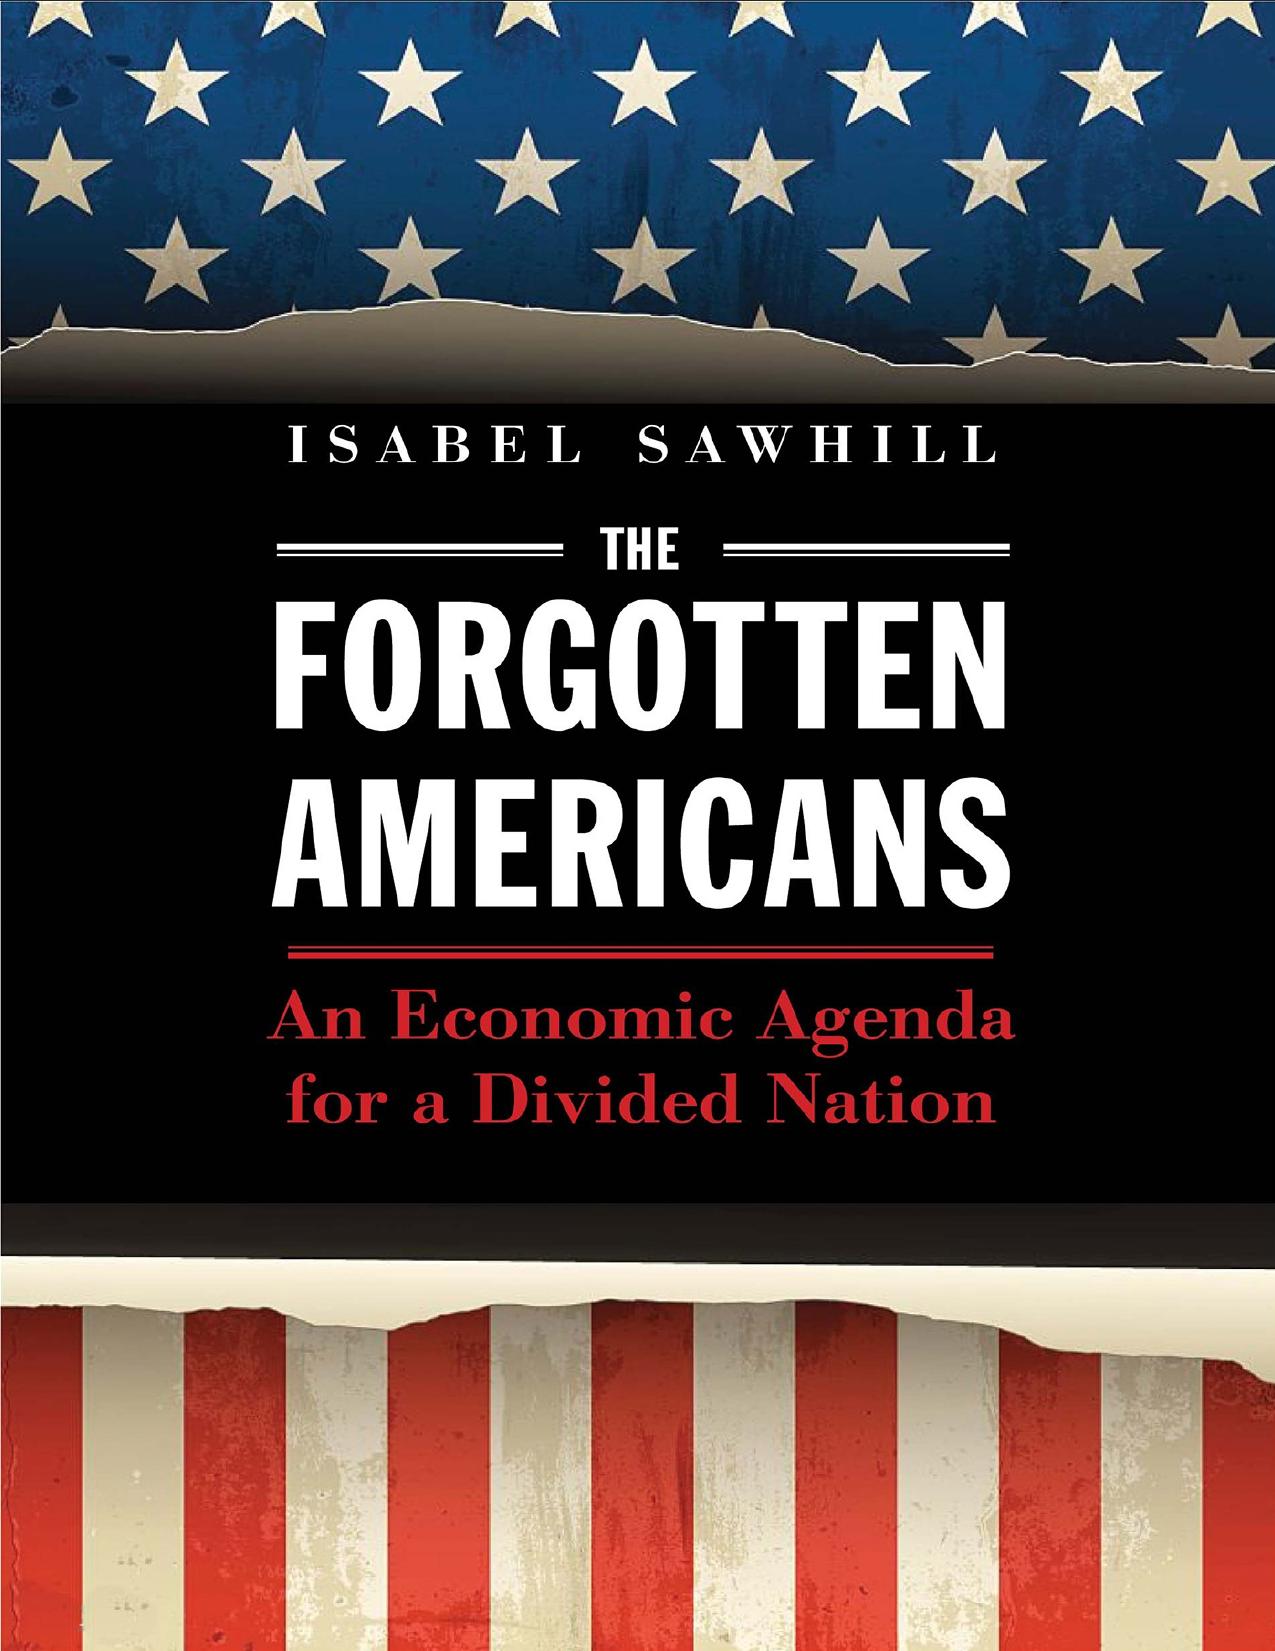 Forgotten Americans An Economic Agenda for a Divided Nation.9780300230369 - Isabel Sawhill.jpg